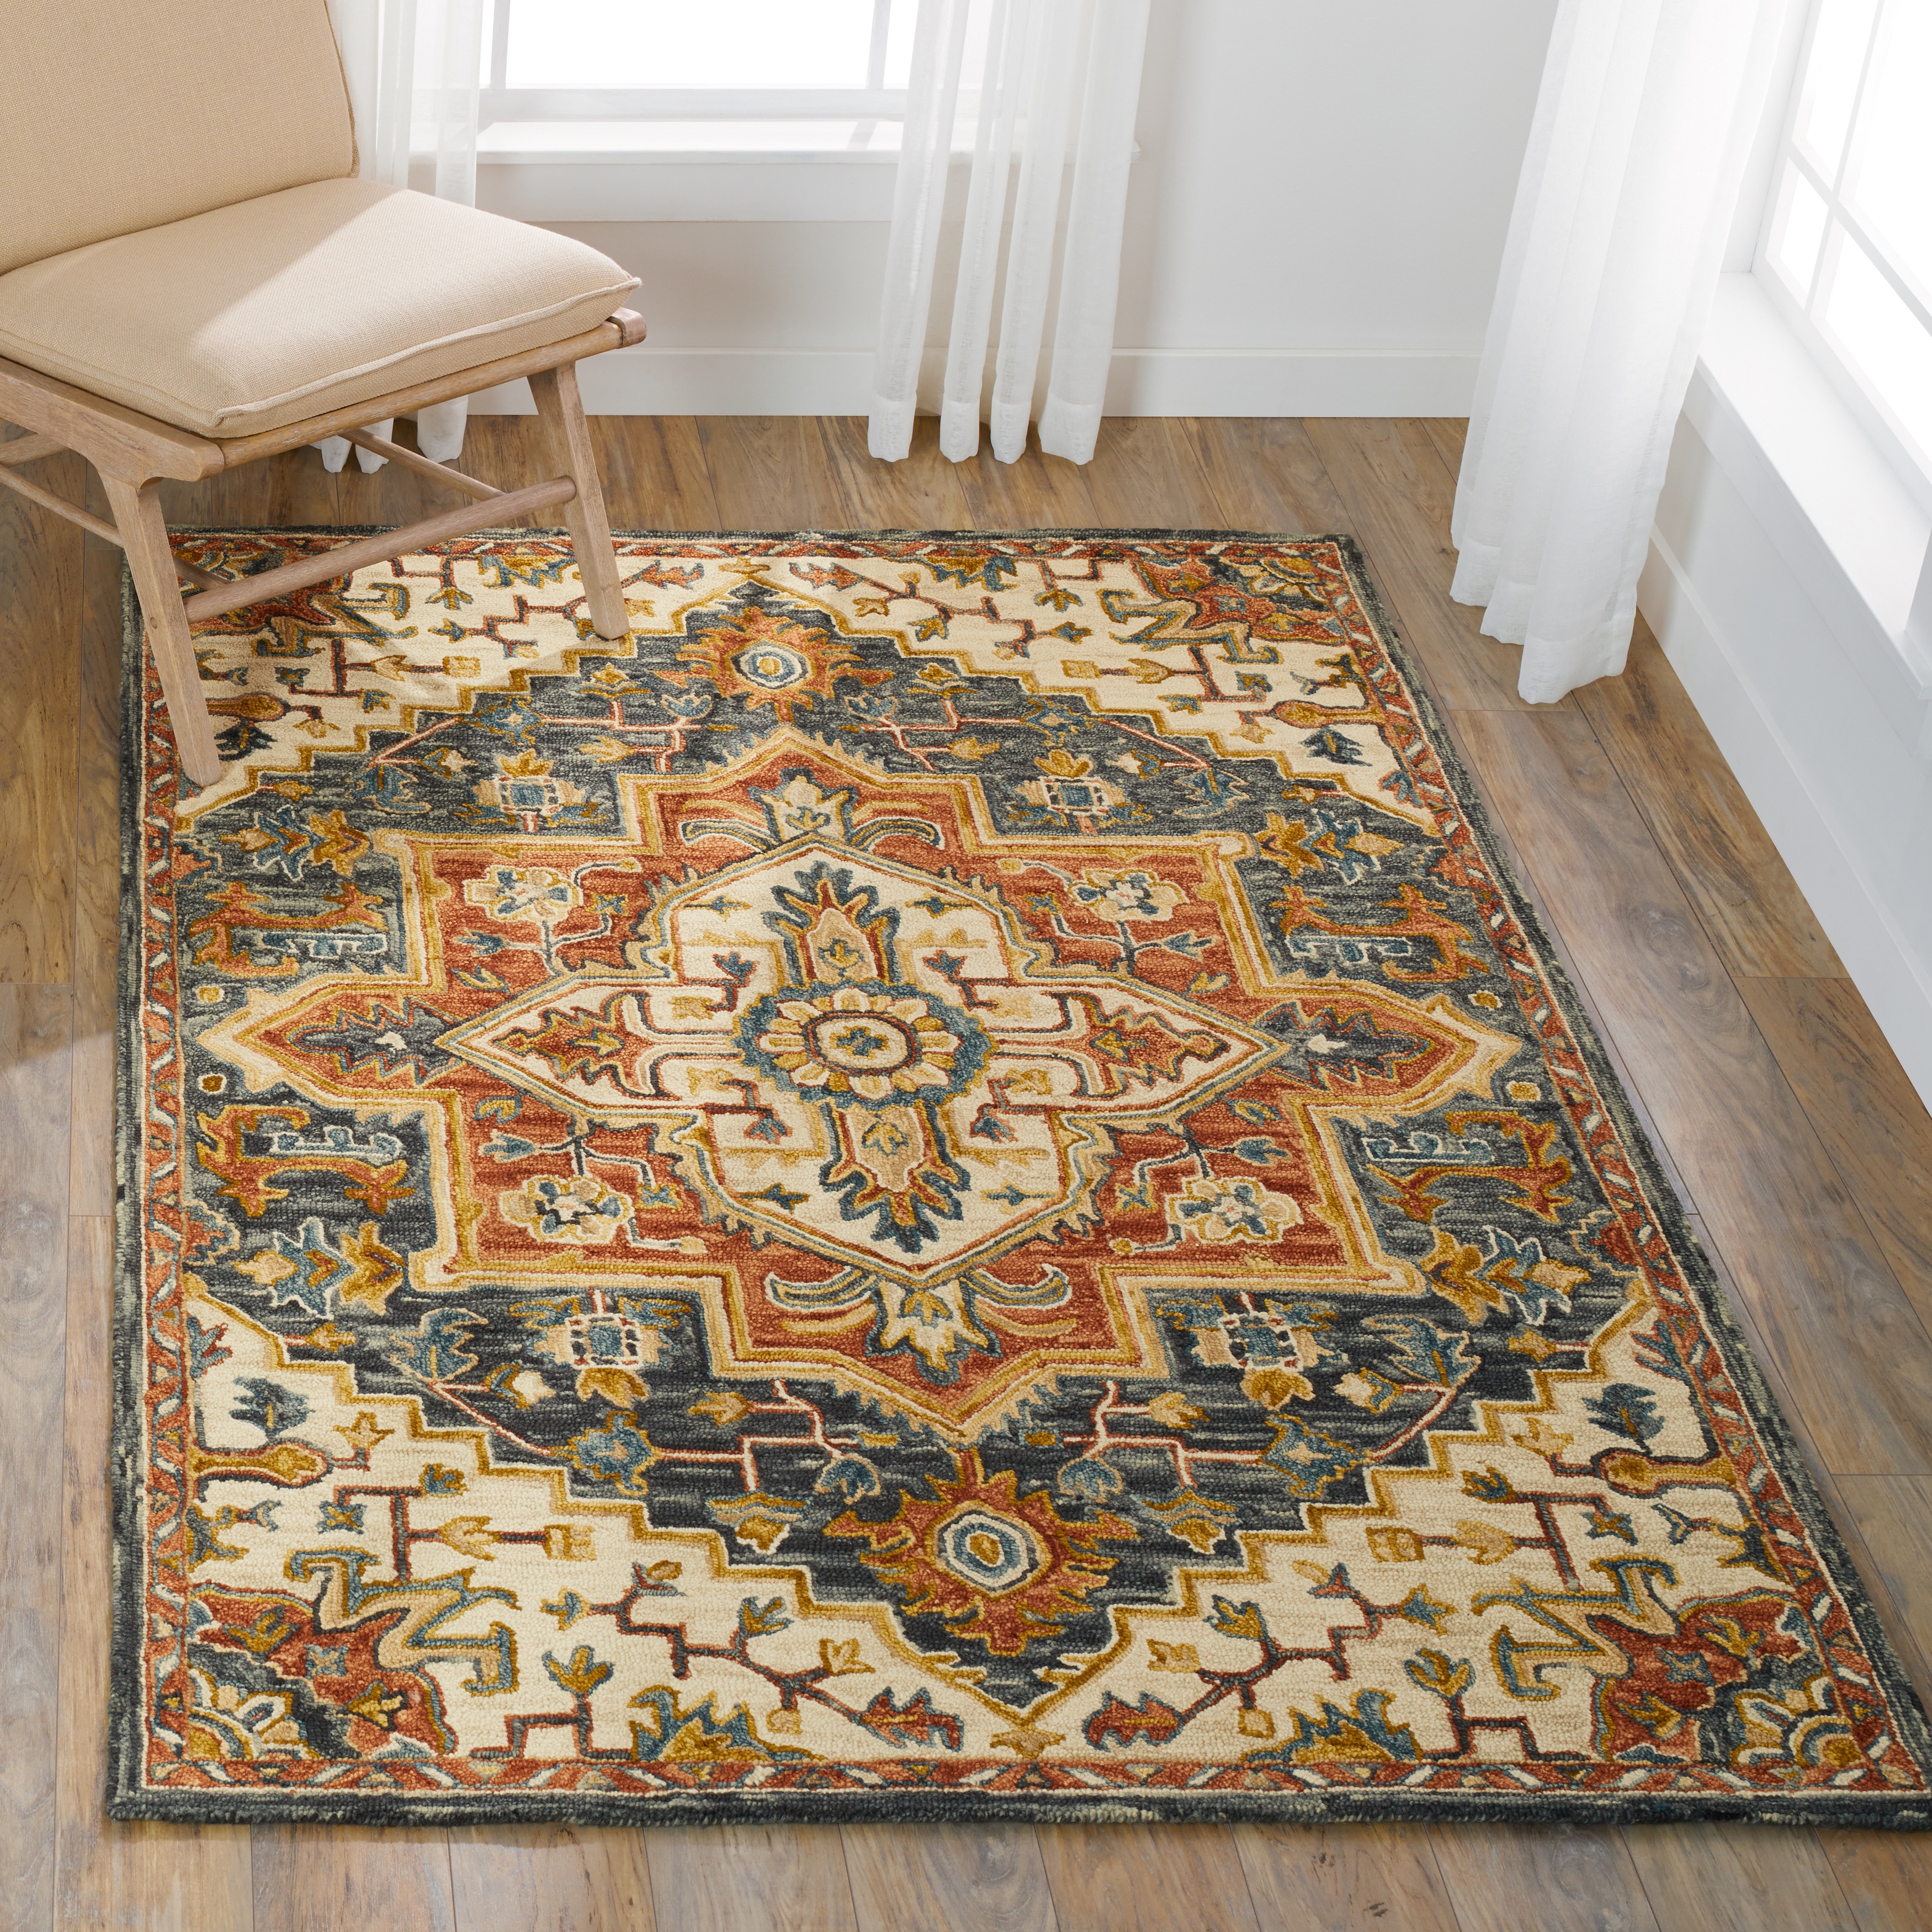 Floral & Botanical, Hand-Hooked Area Rugs - Bed Bath & Beyond